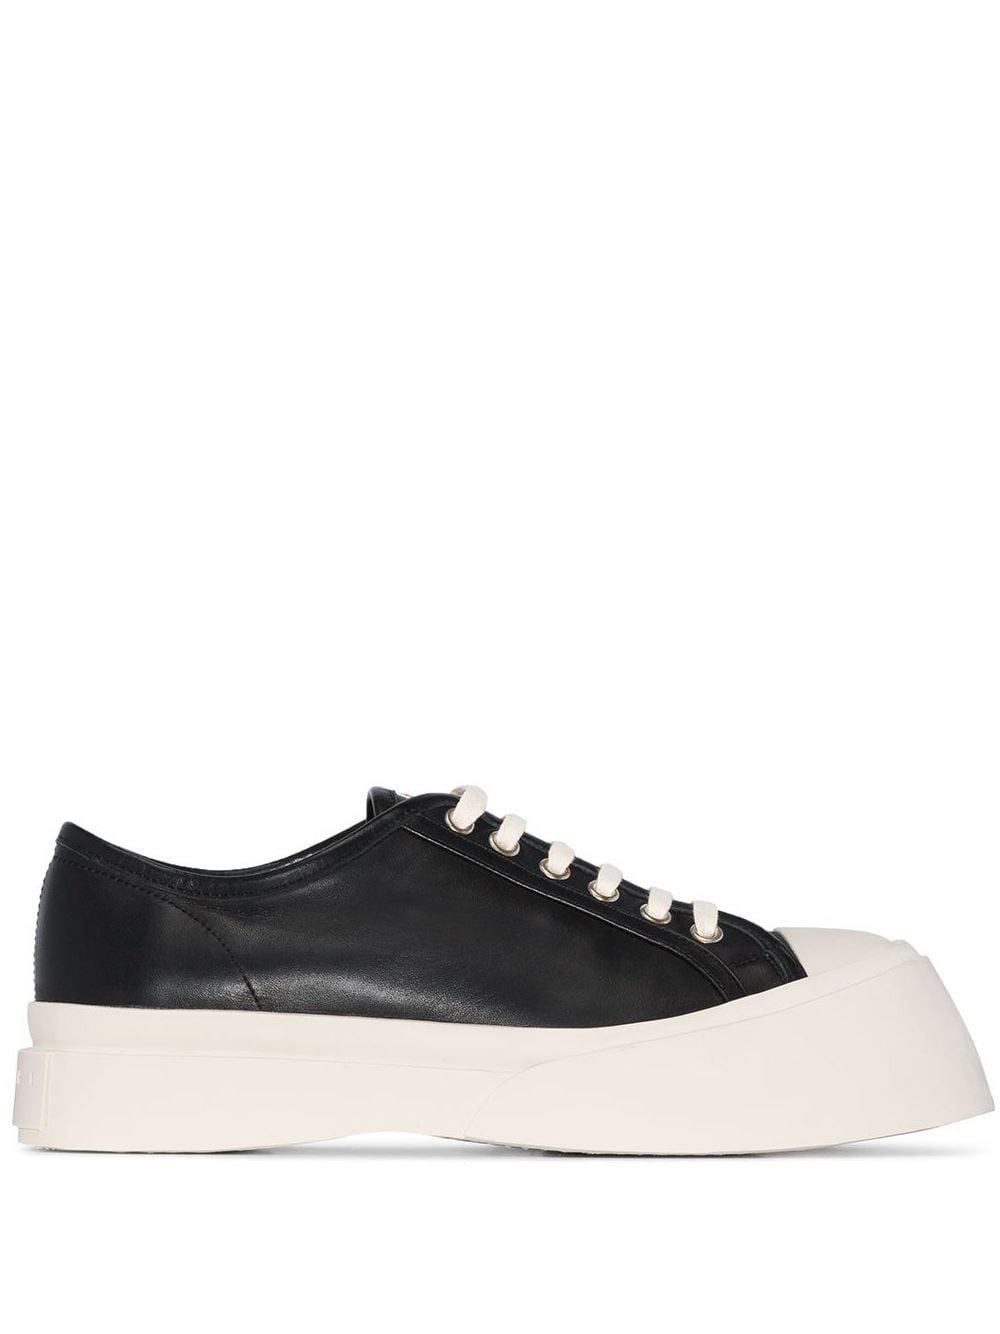 Marni Pablo Leather Sneakers In Black